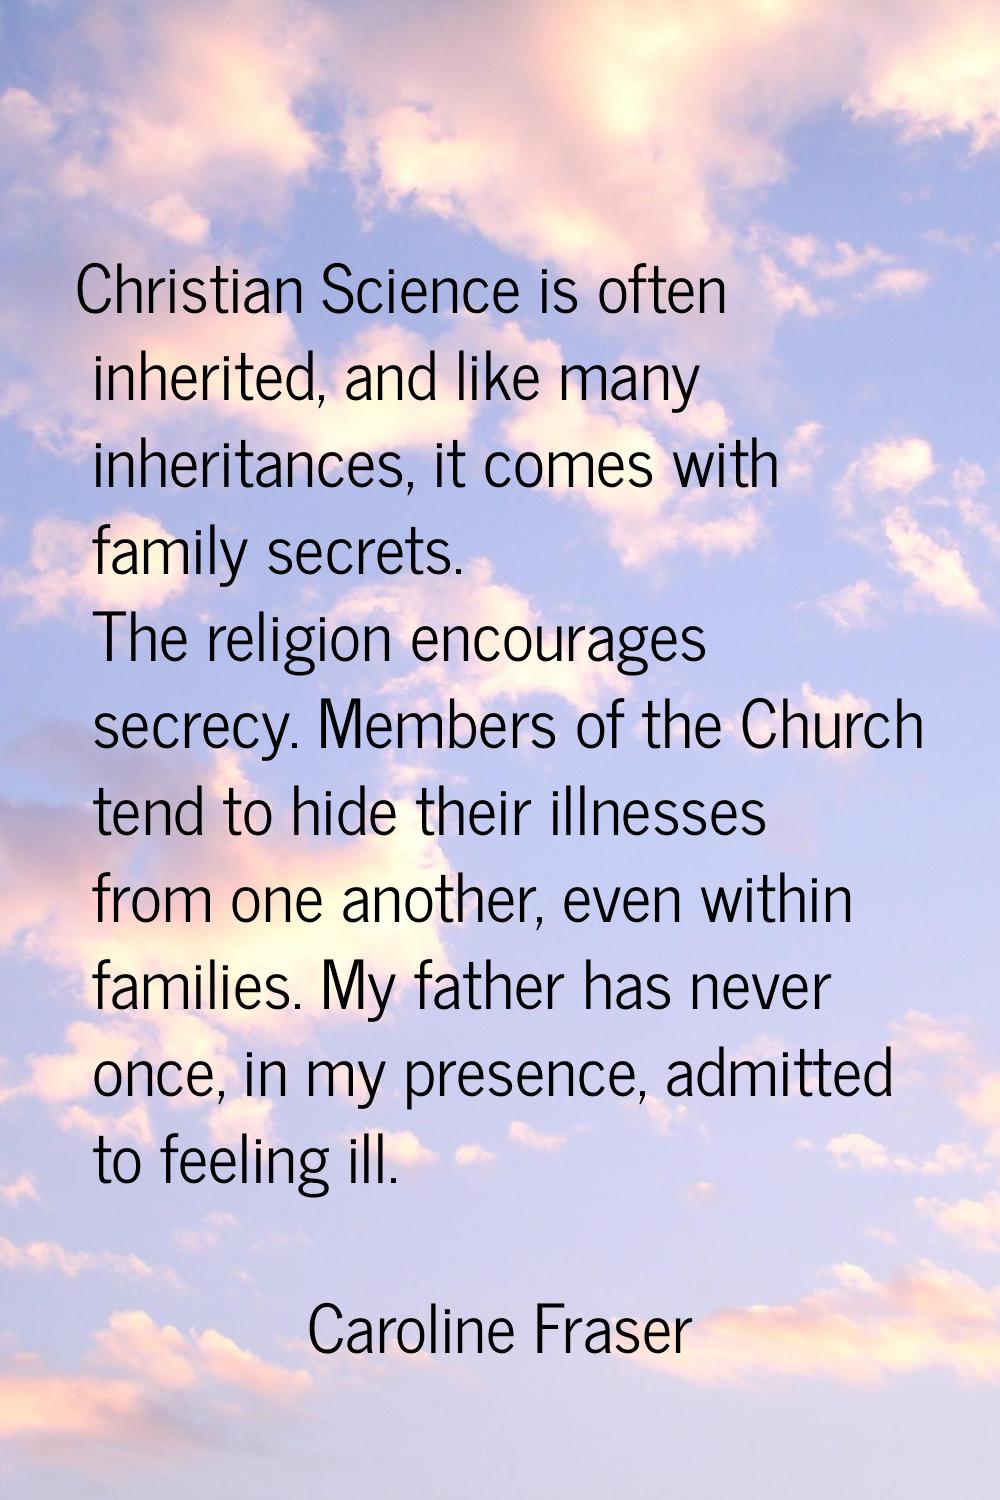 Christian Science is often inherited, and like many inheritances, it comes with family secrets. The